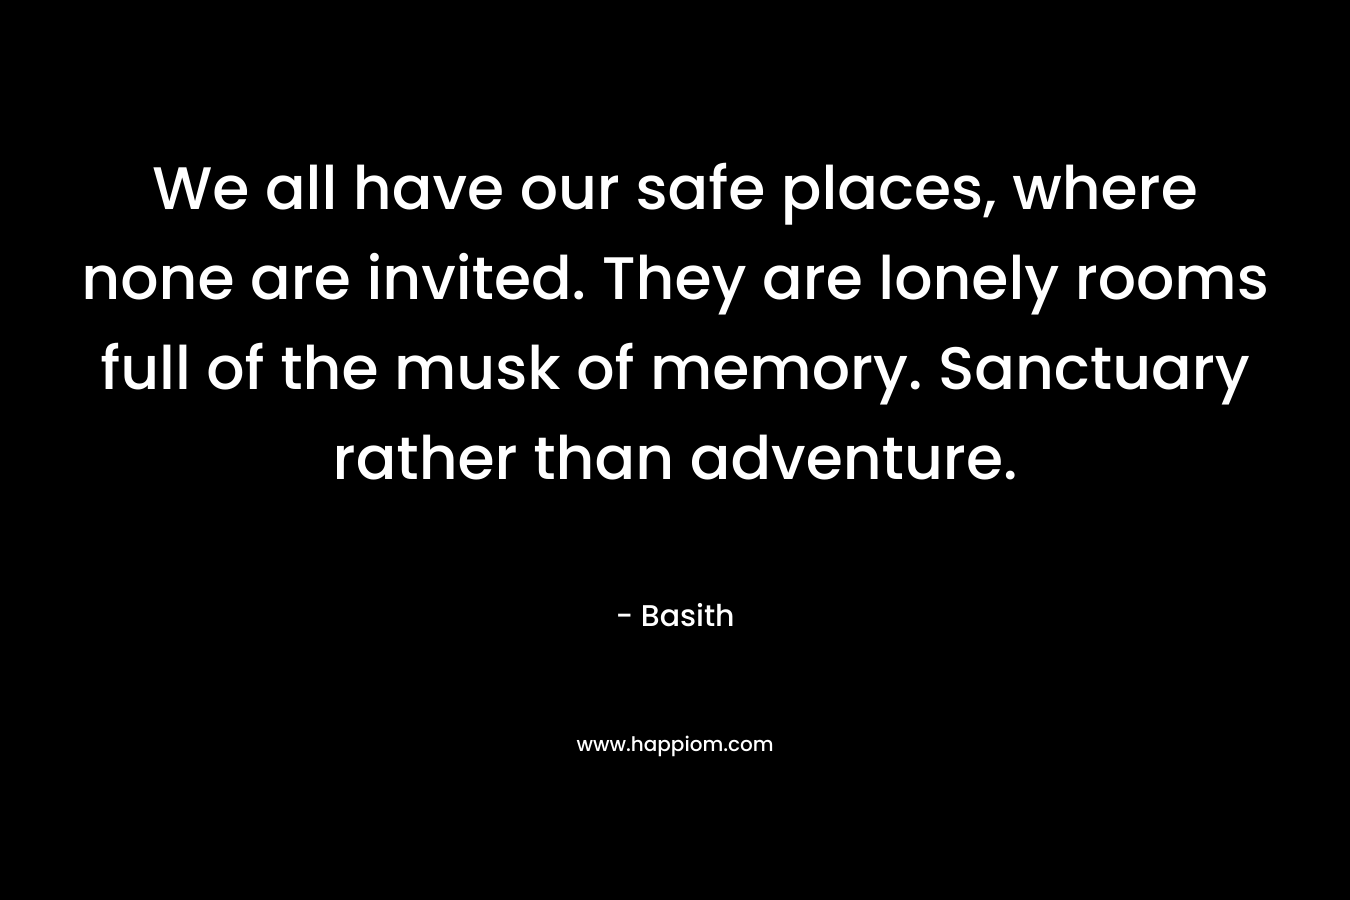 We all have our safe places, where none are invited. They are lonely rooms full of the musk of memory. Sanctuary rather than adventure. – Basith